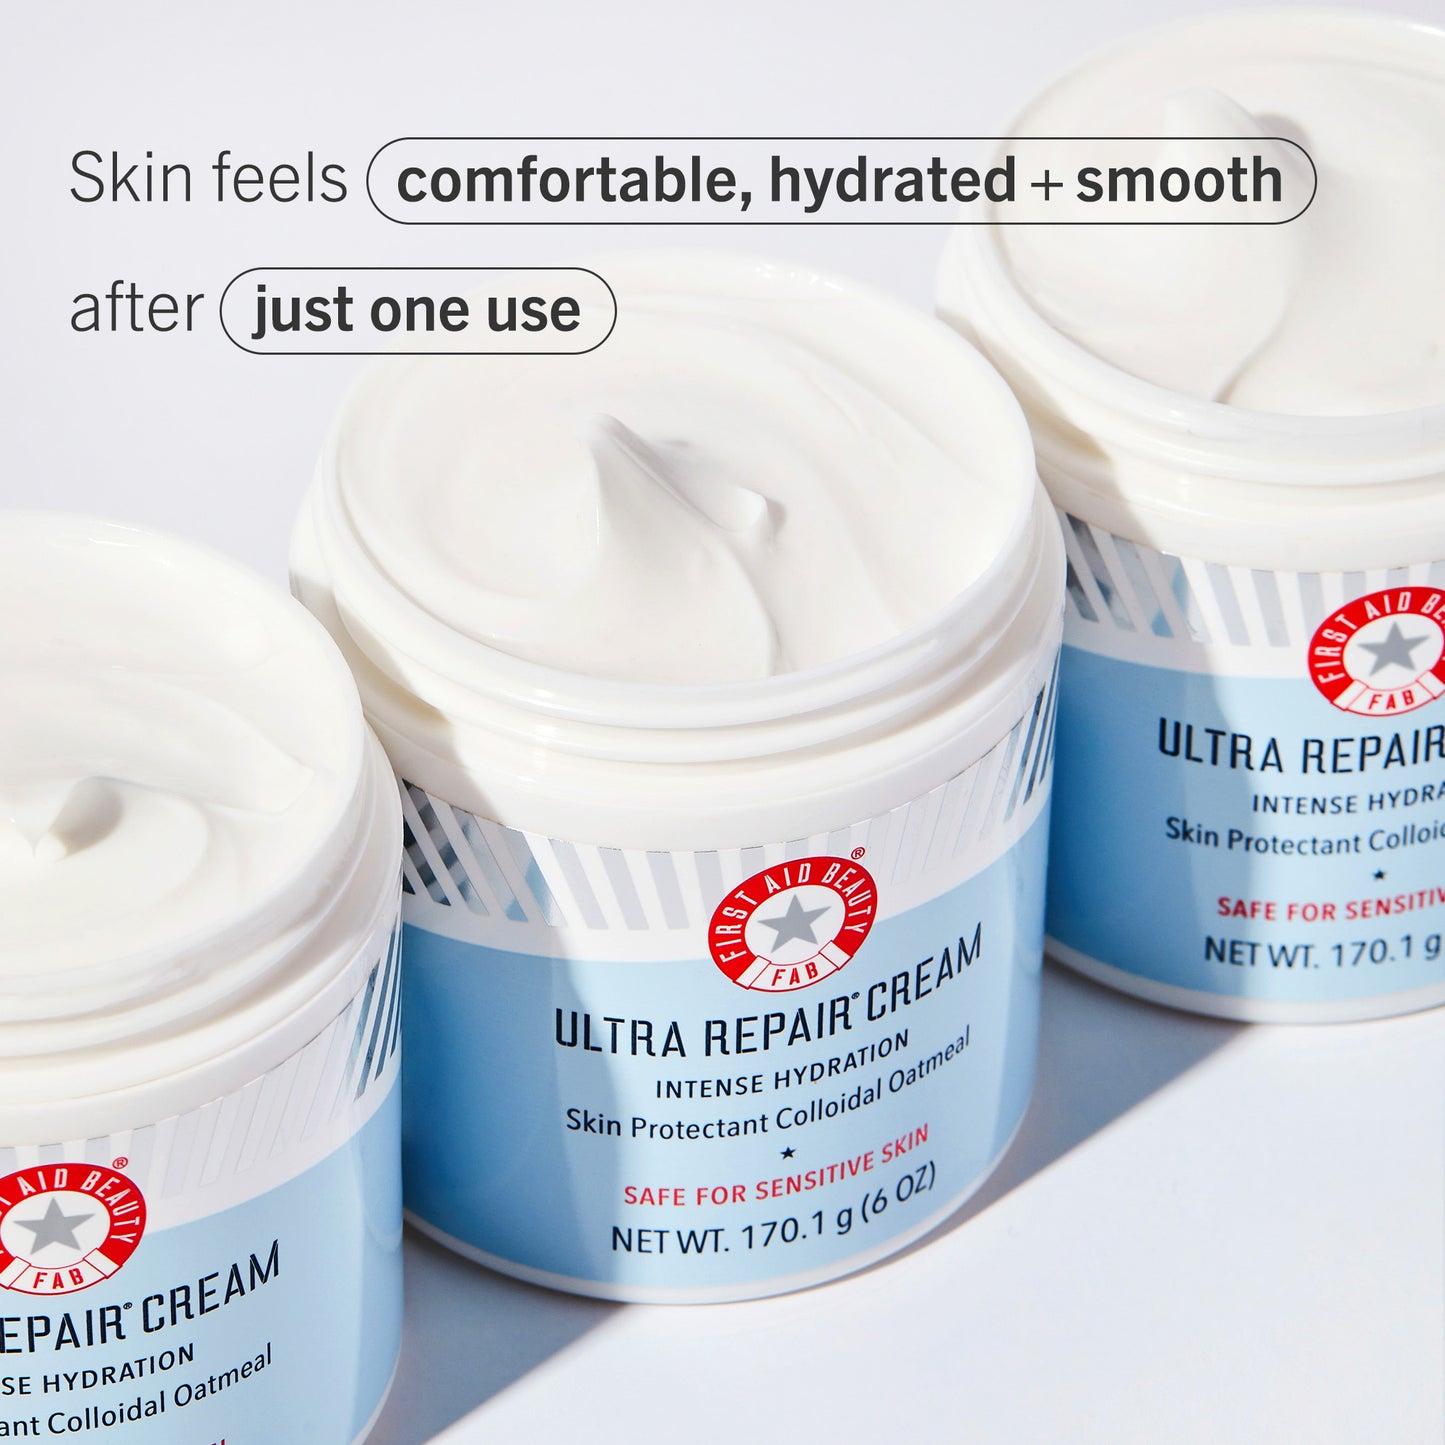 Open jars of Ultra Repair Cream.  Skin feels comfortable, hydrated + smooth after just one use.